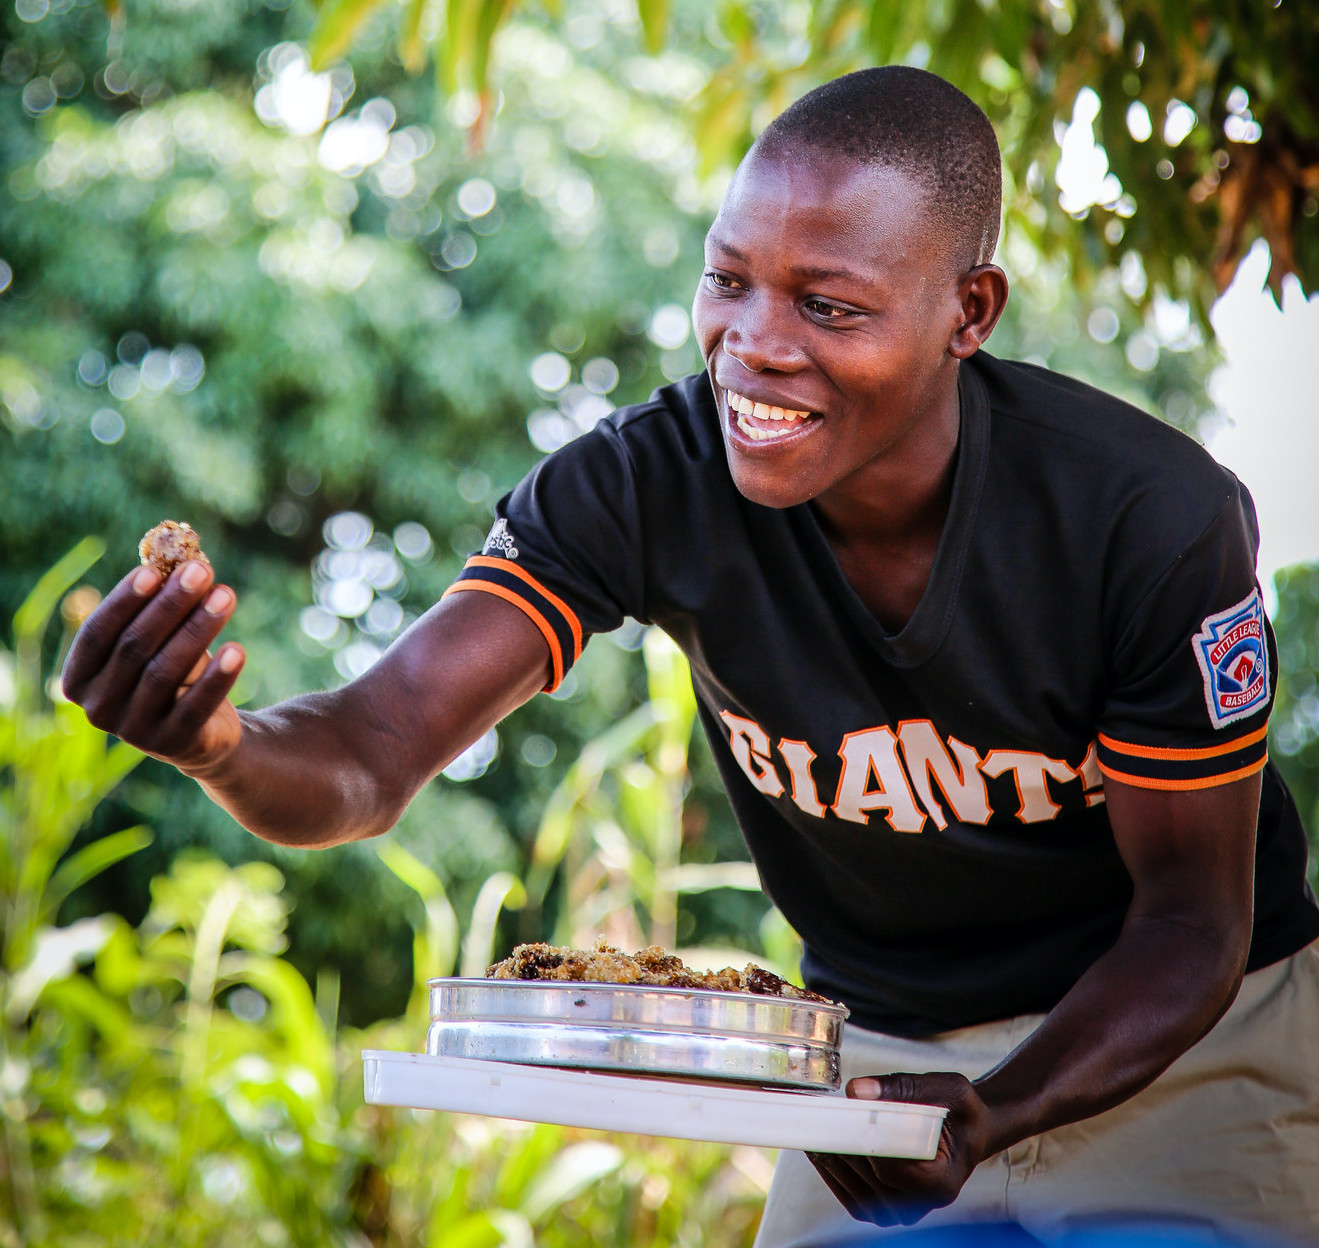 African man smiling and holding out food